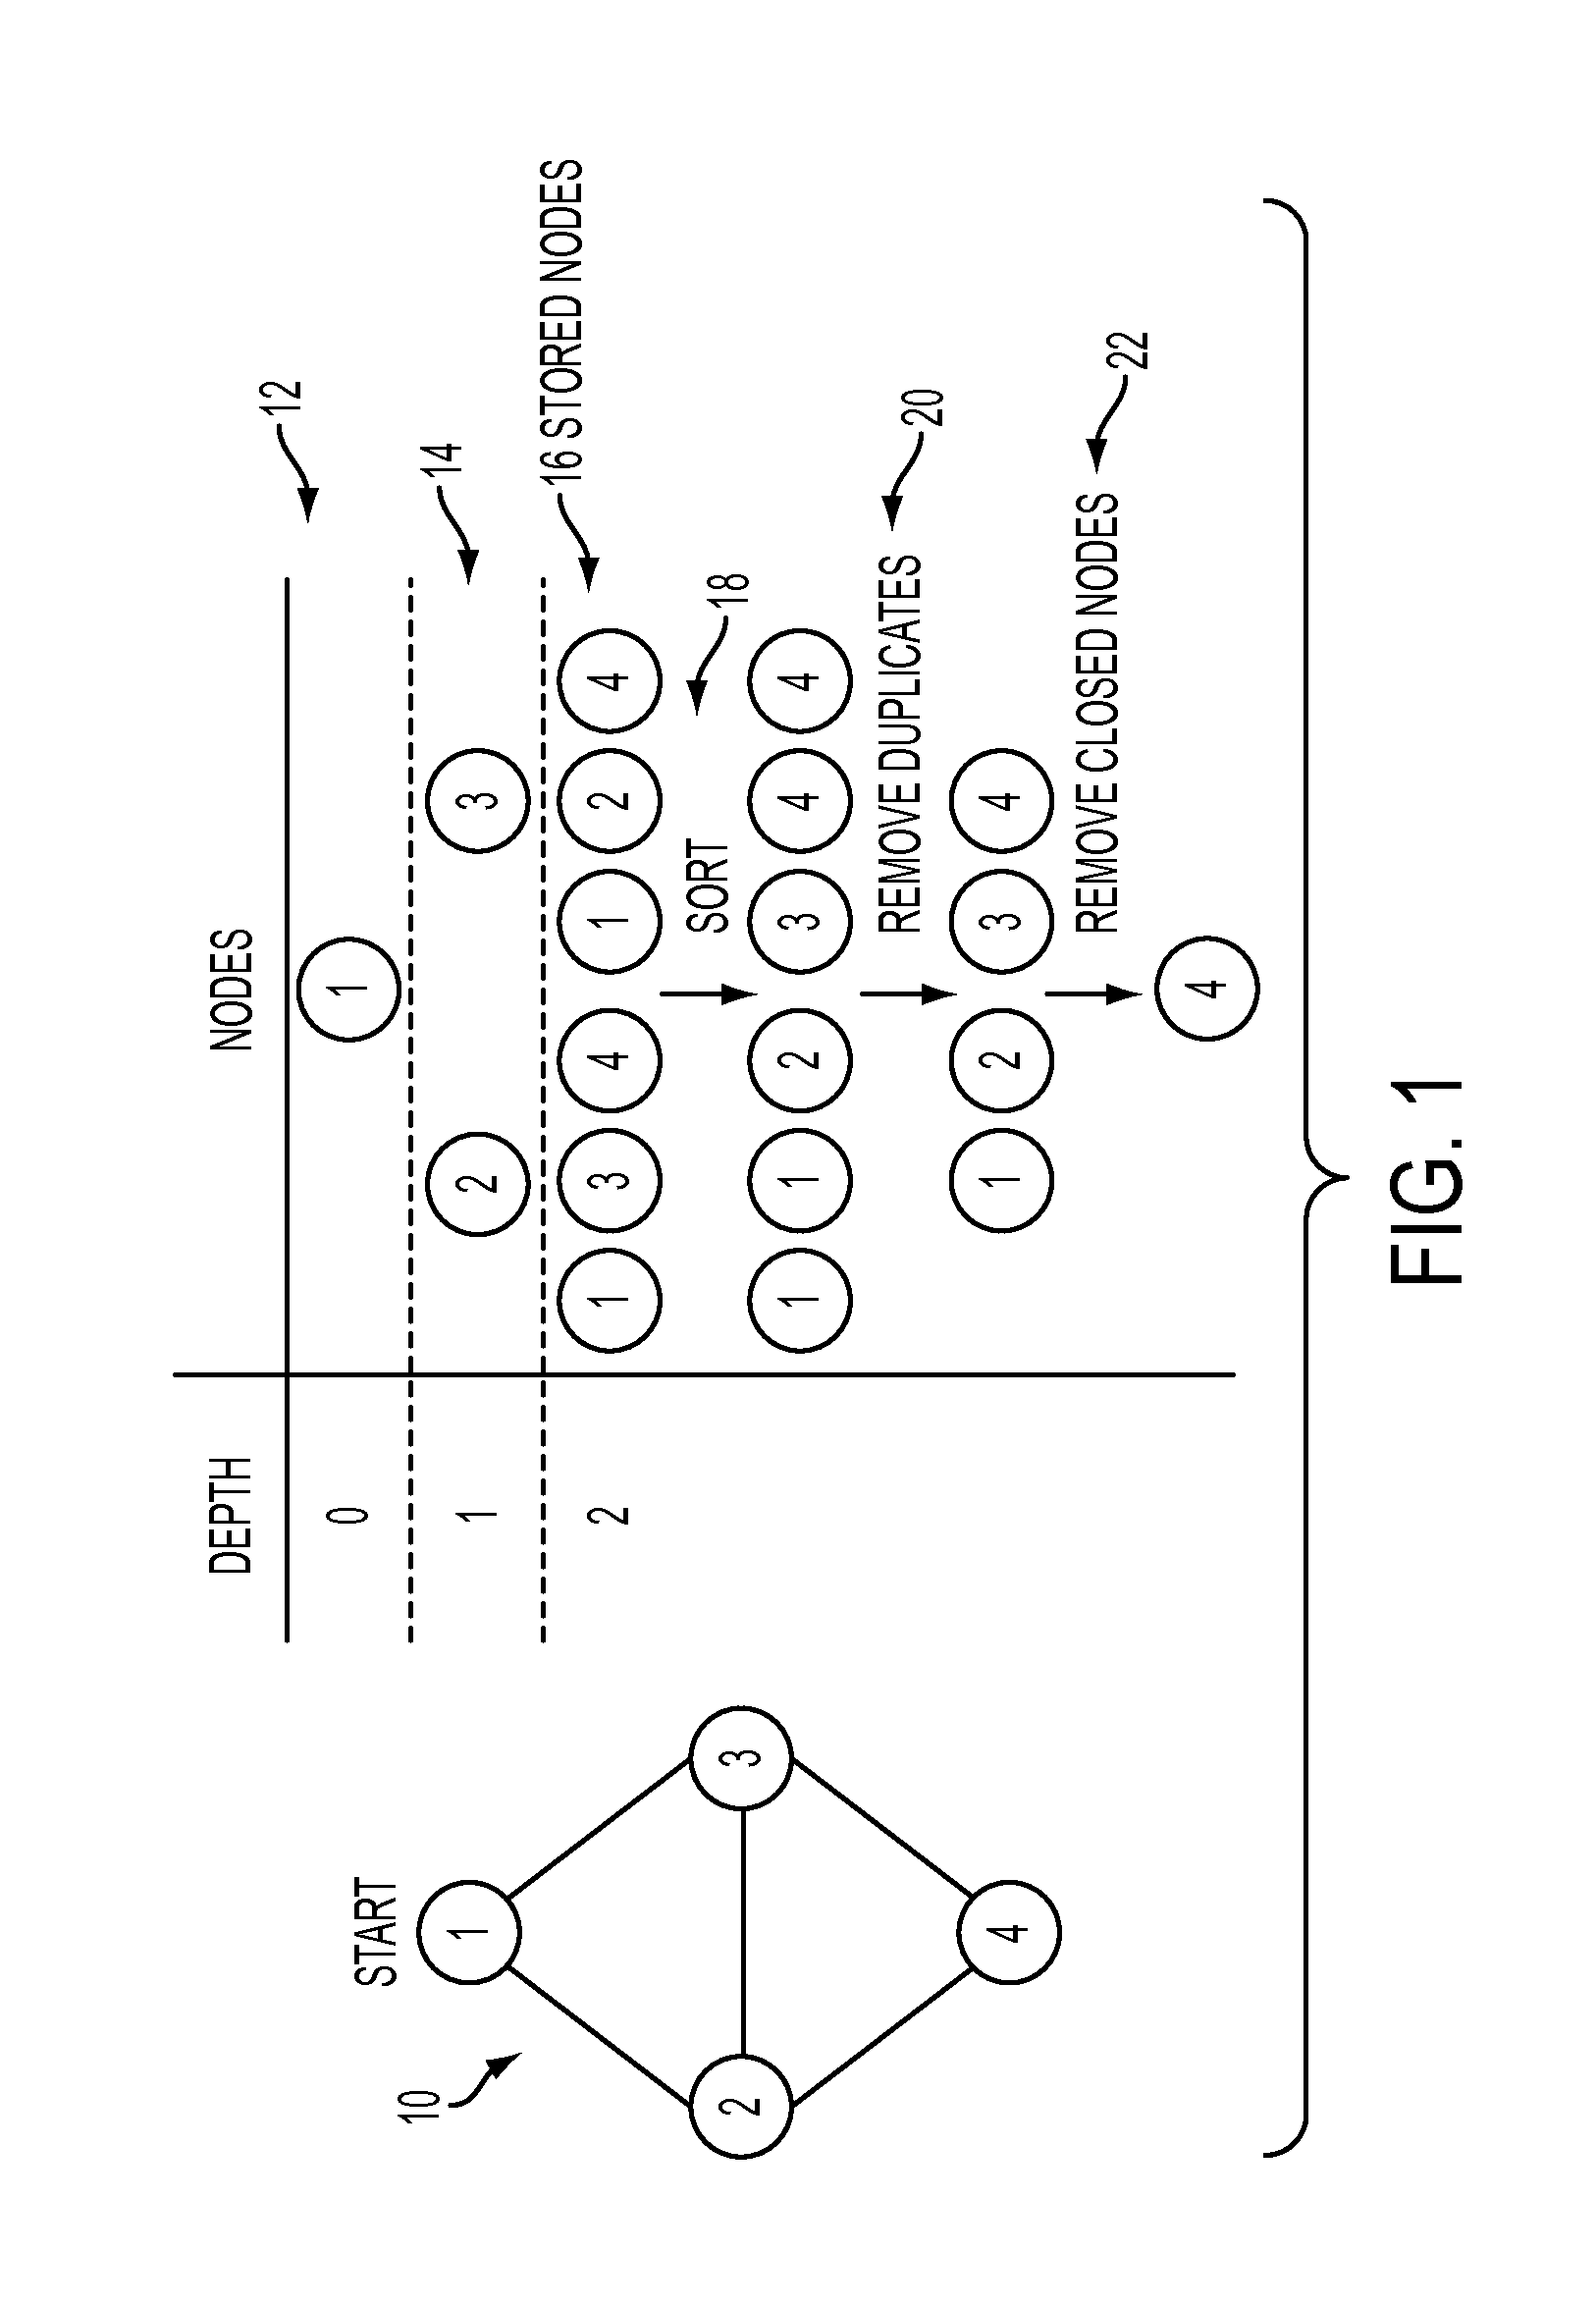 System and method for dynamic state-space abstractions in external-memory and parallel graph search